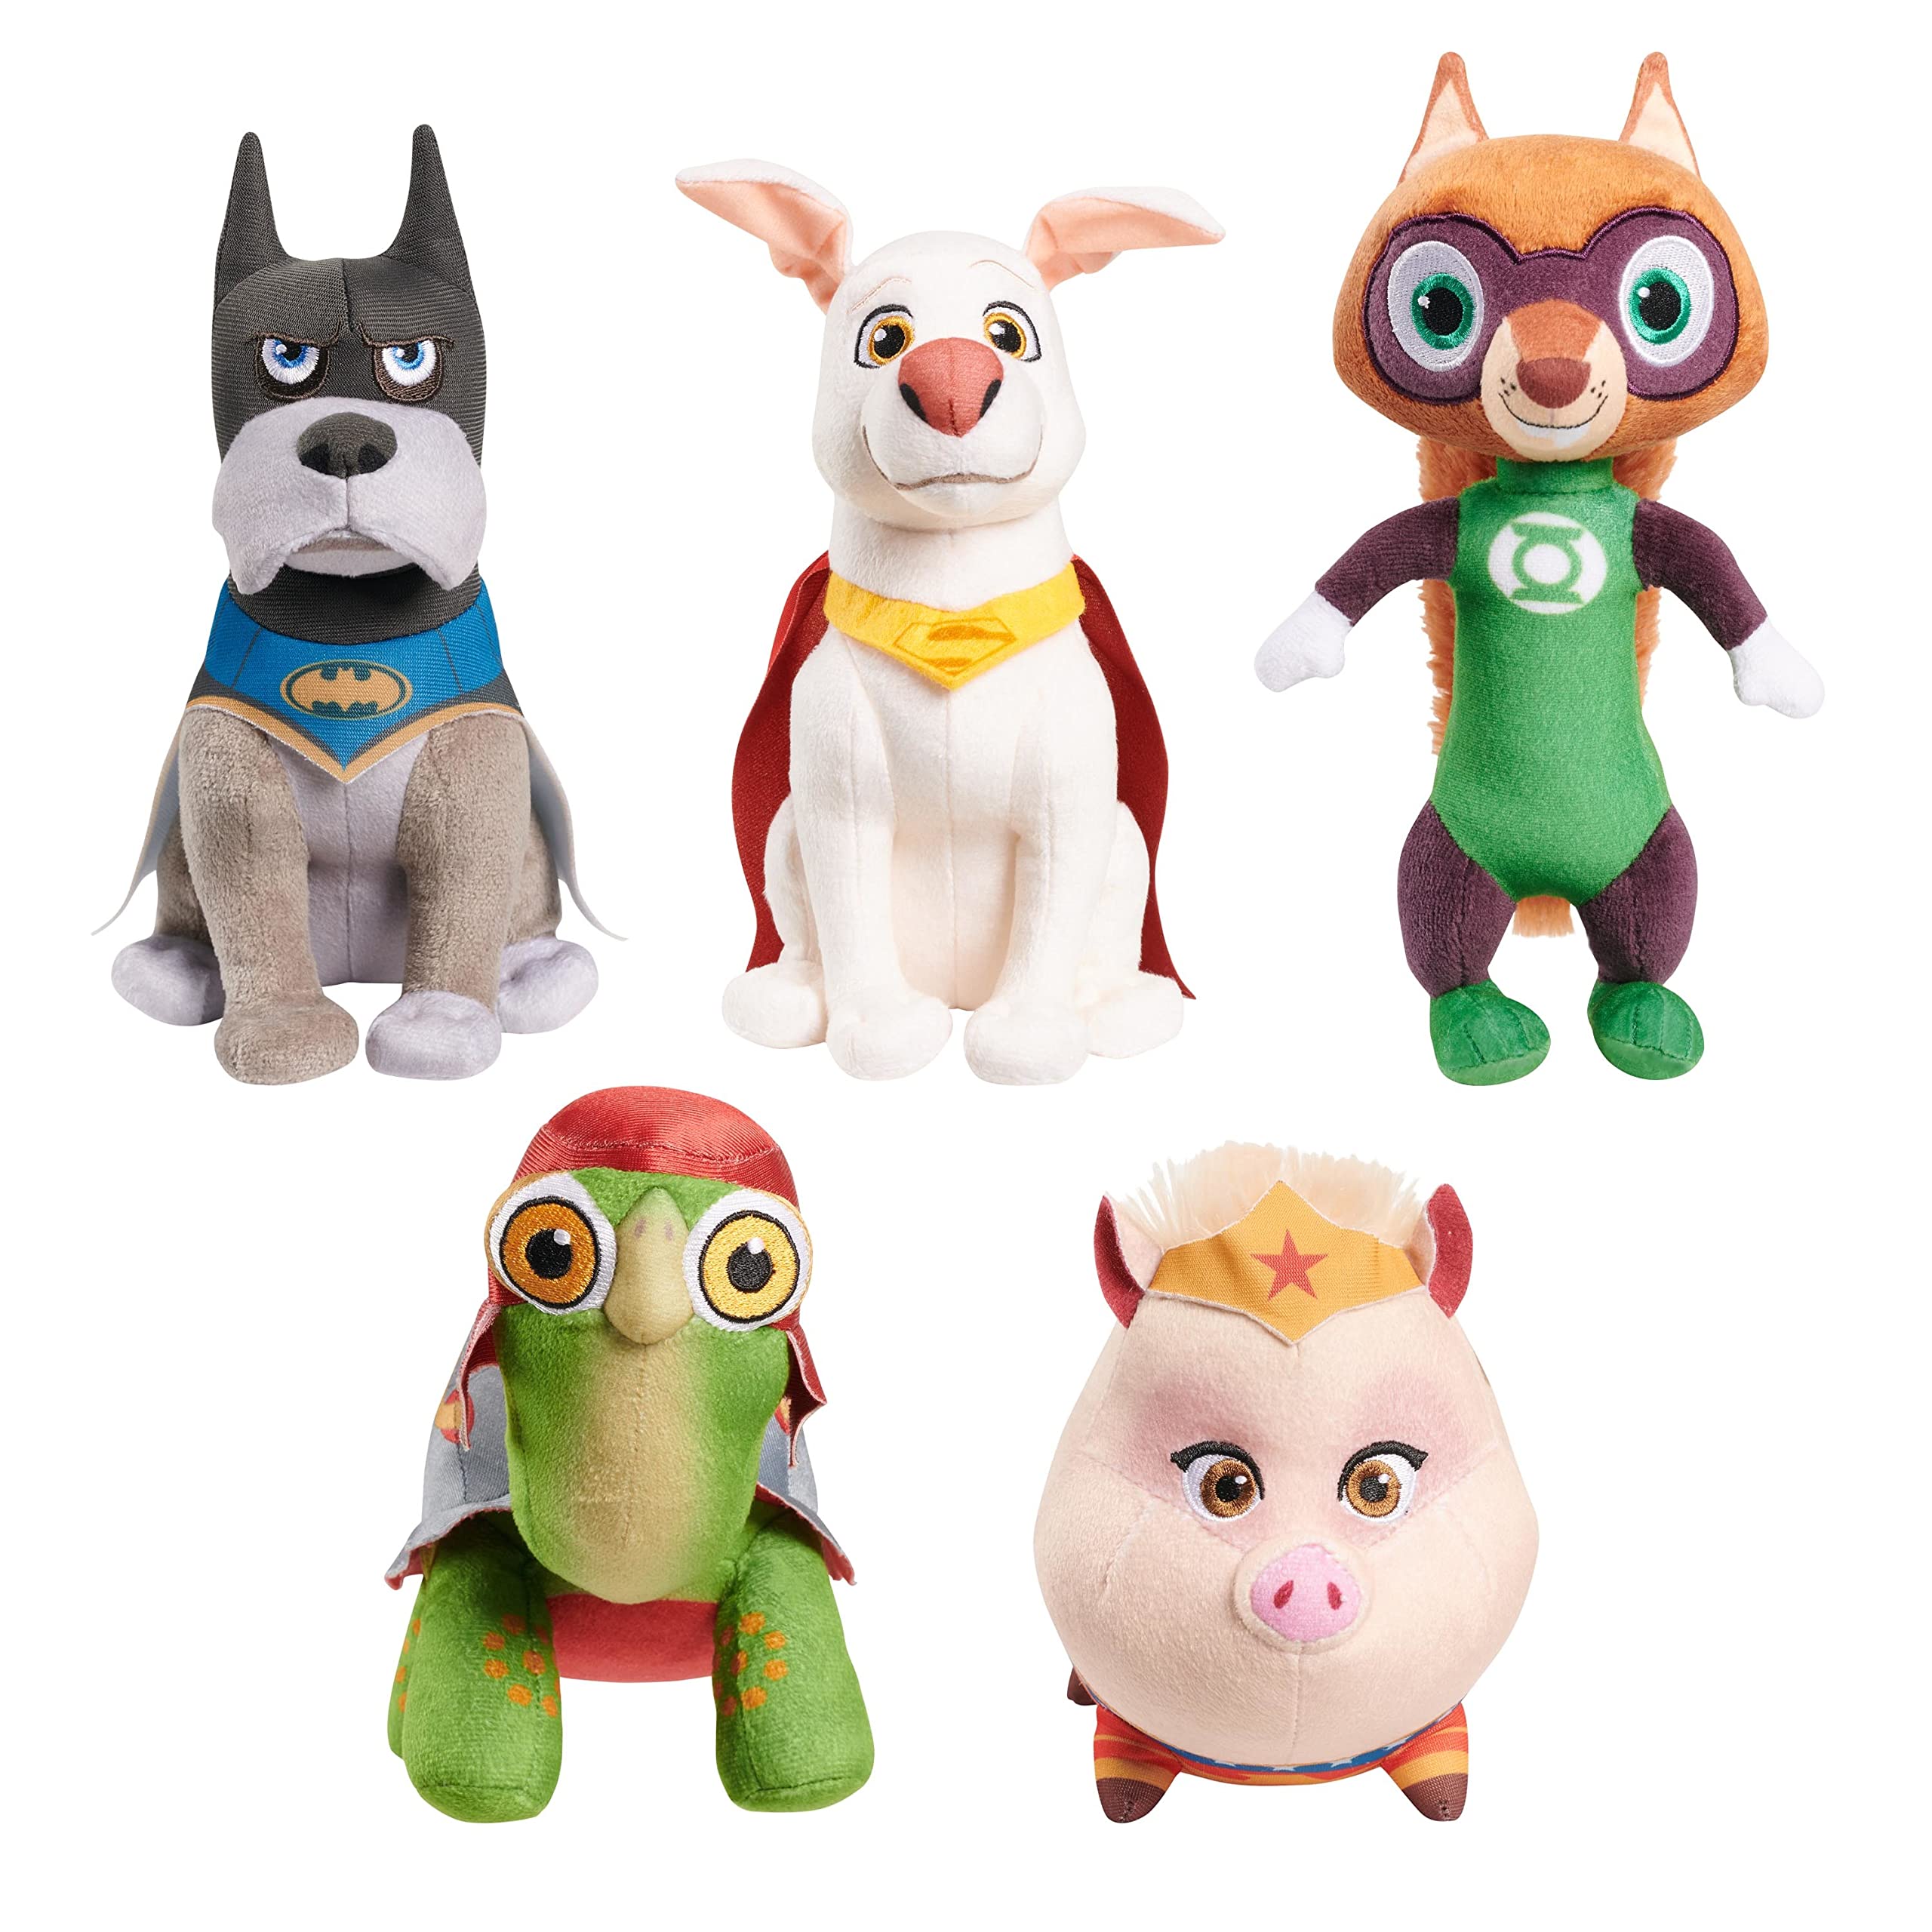 5-Piece DC Super Pets Small Plush Stuffed Animals Set $14.93, More + Free Shipping w/ Prime or on $25+